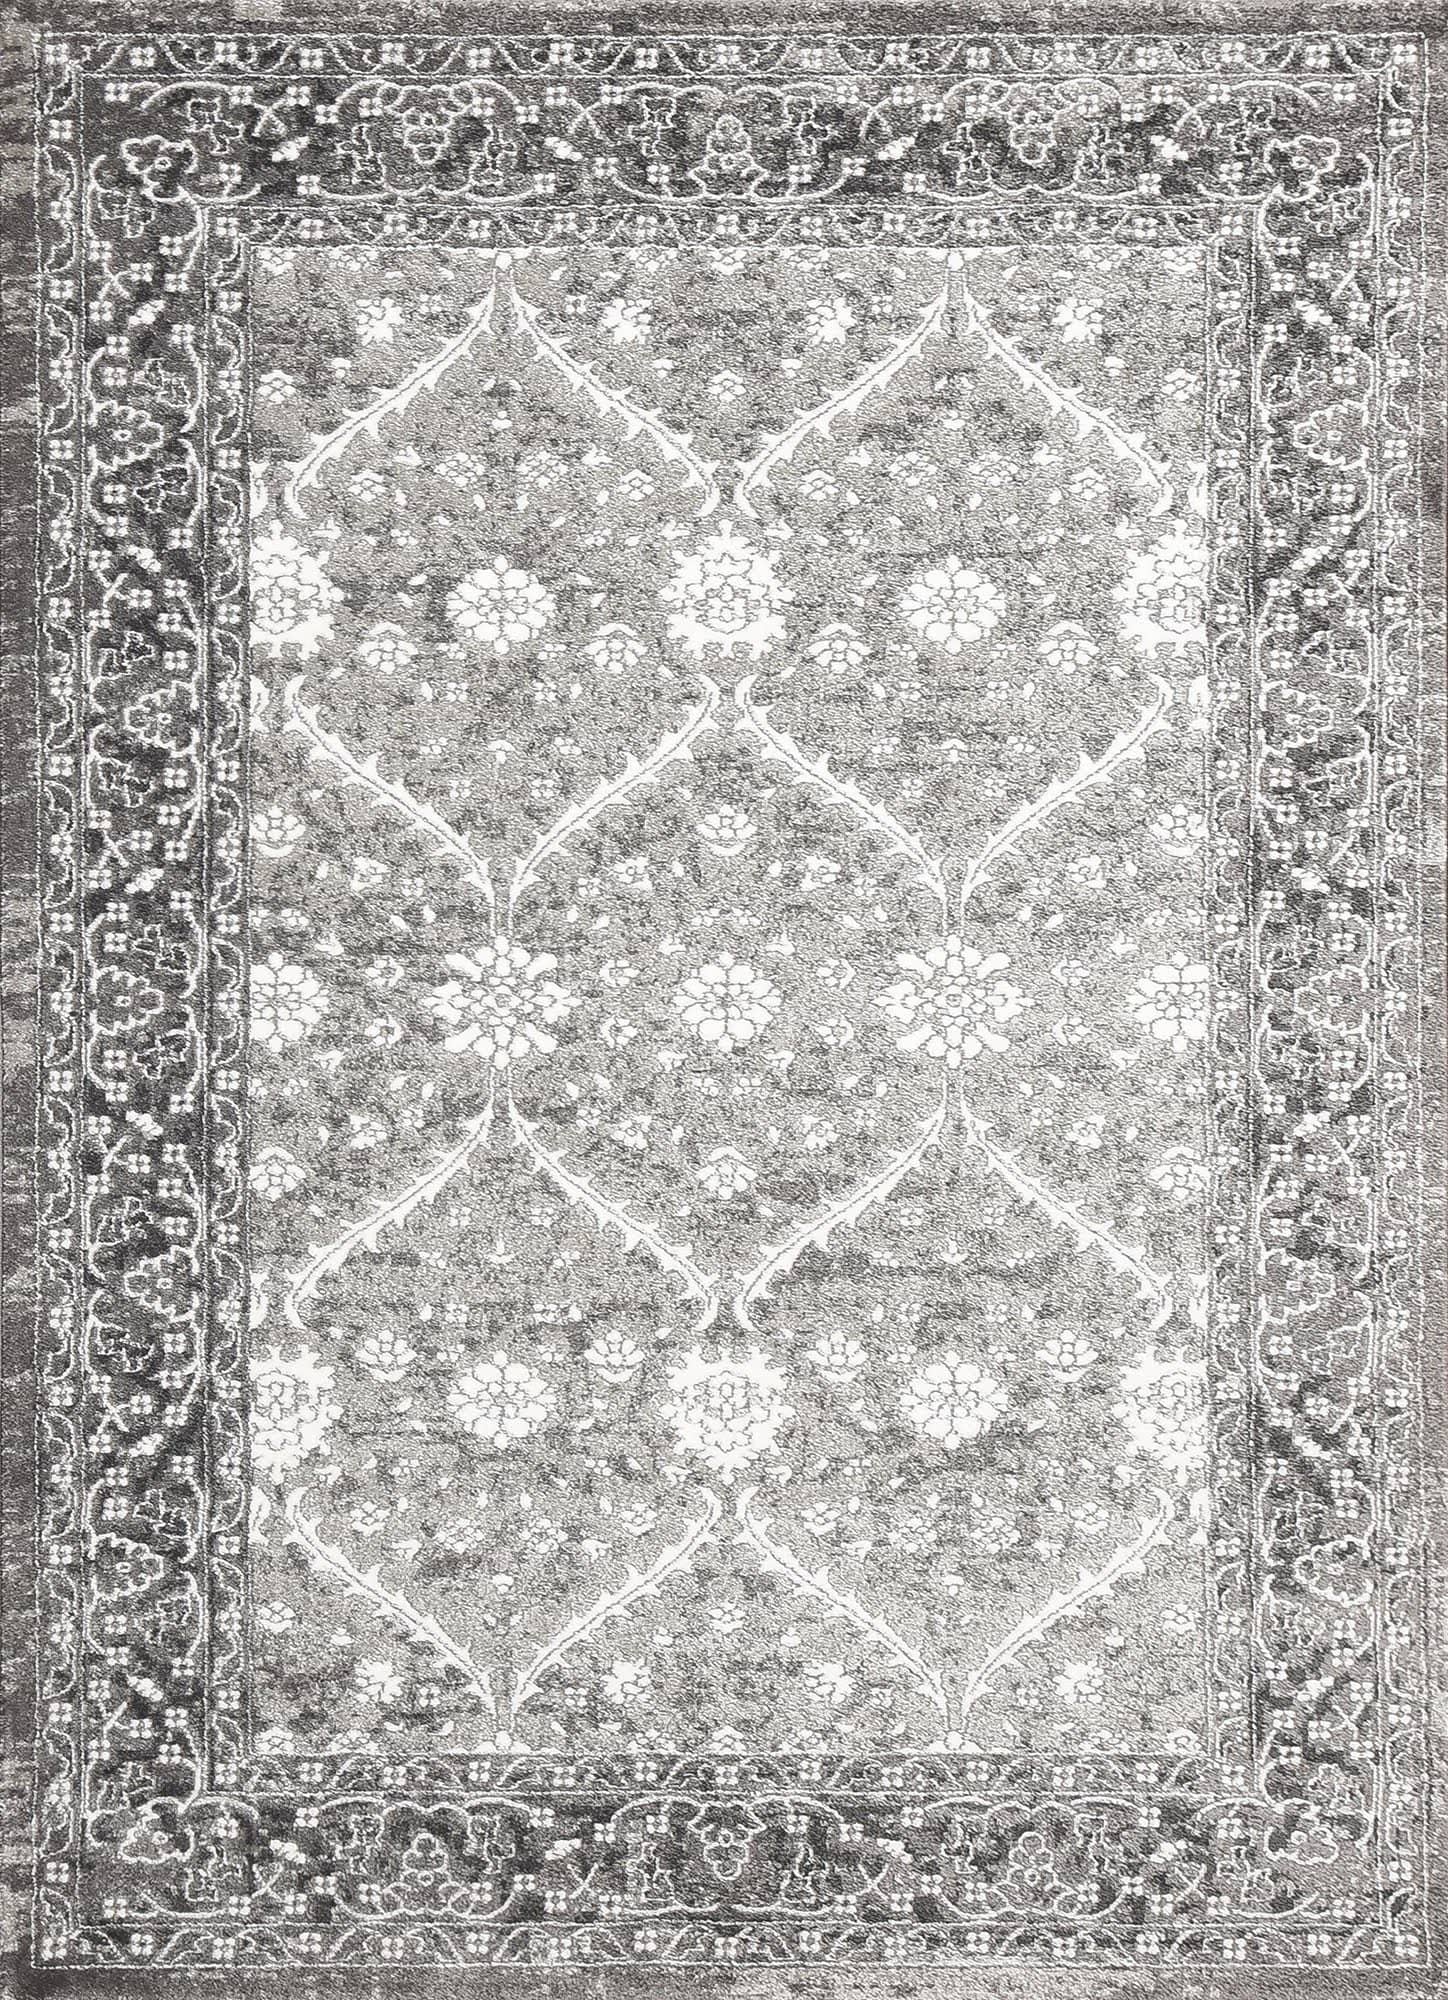 Contemporary Transitional Area Rug Zara 300 - Context USA - Area Rug by MSRUGS